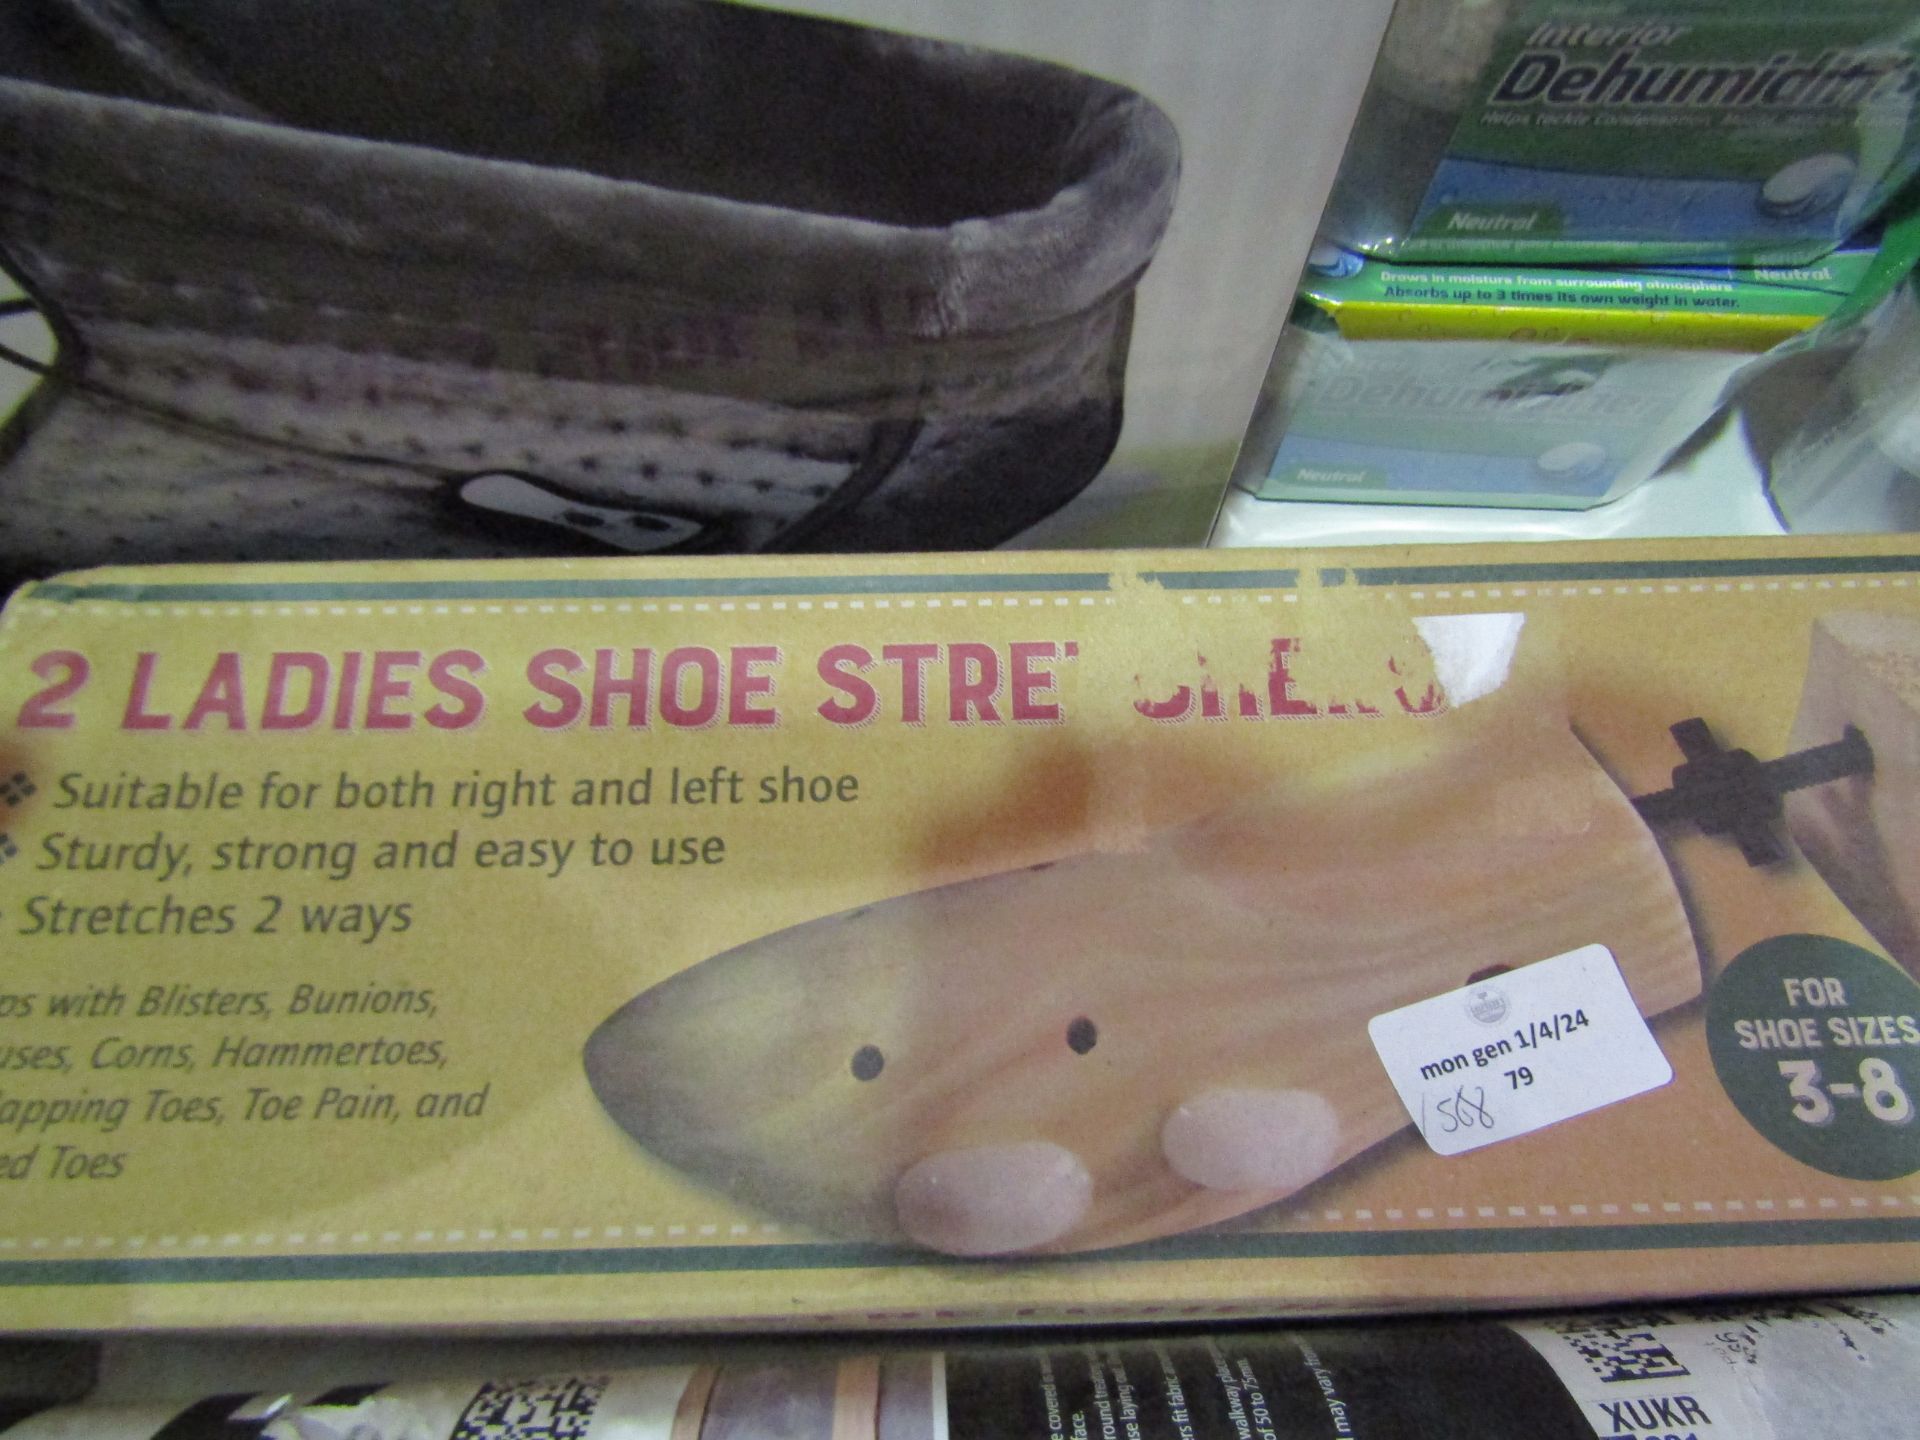 Box Of 2 Ladies Shoe Stretchers, For Sizes: 3-8 - Unchecked & Boxed.